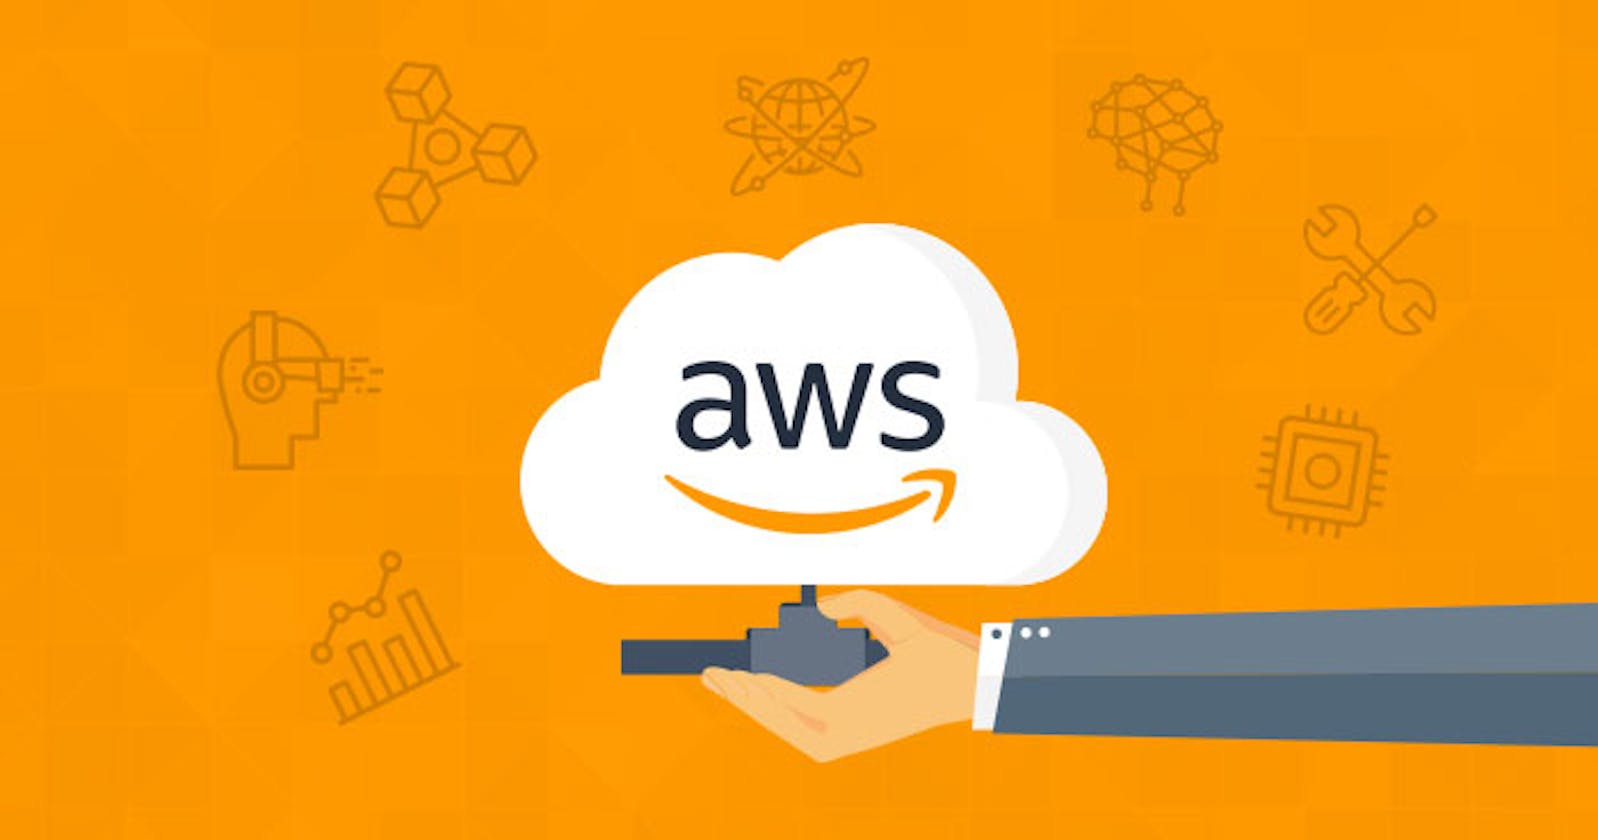 AWS bignners guide